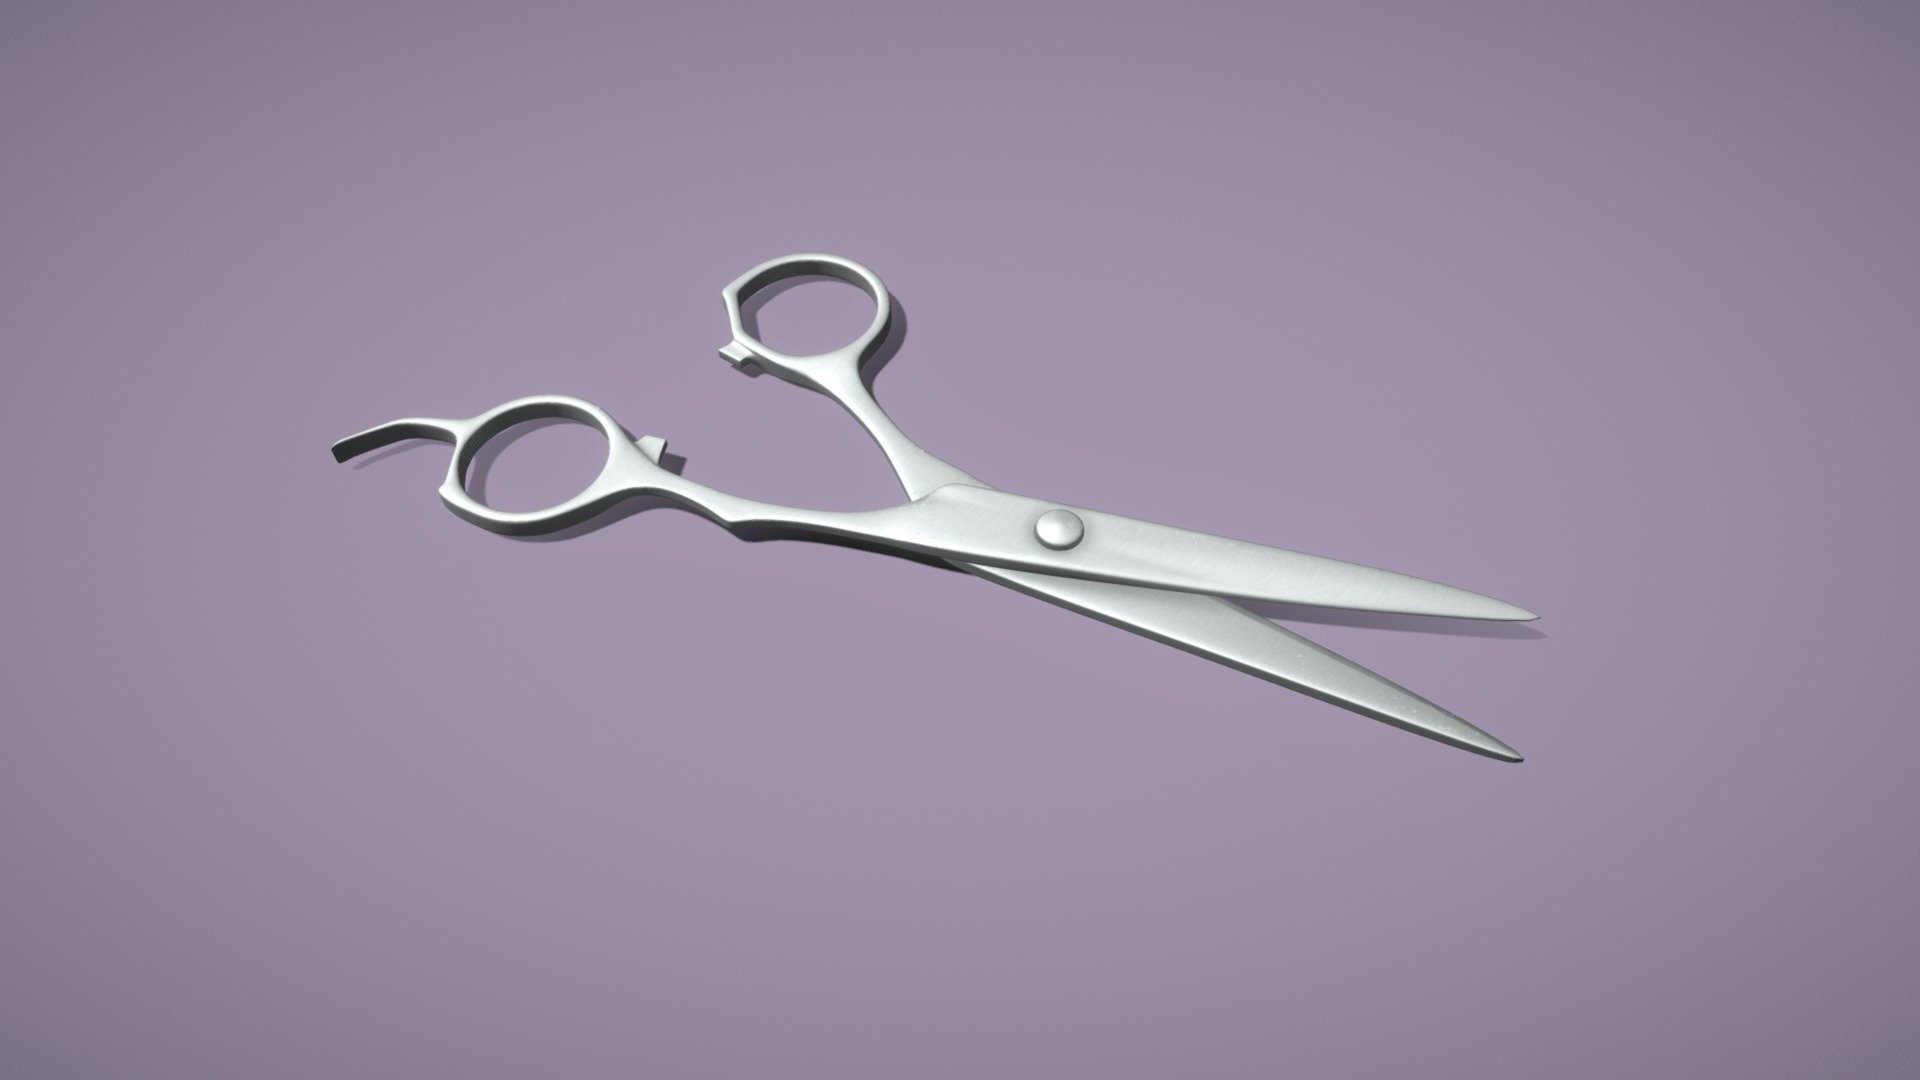 Some scissors I modeled for a hair salon 3d scene I was making. Modeled in Maya, textured in Substance Painter 3d model